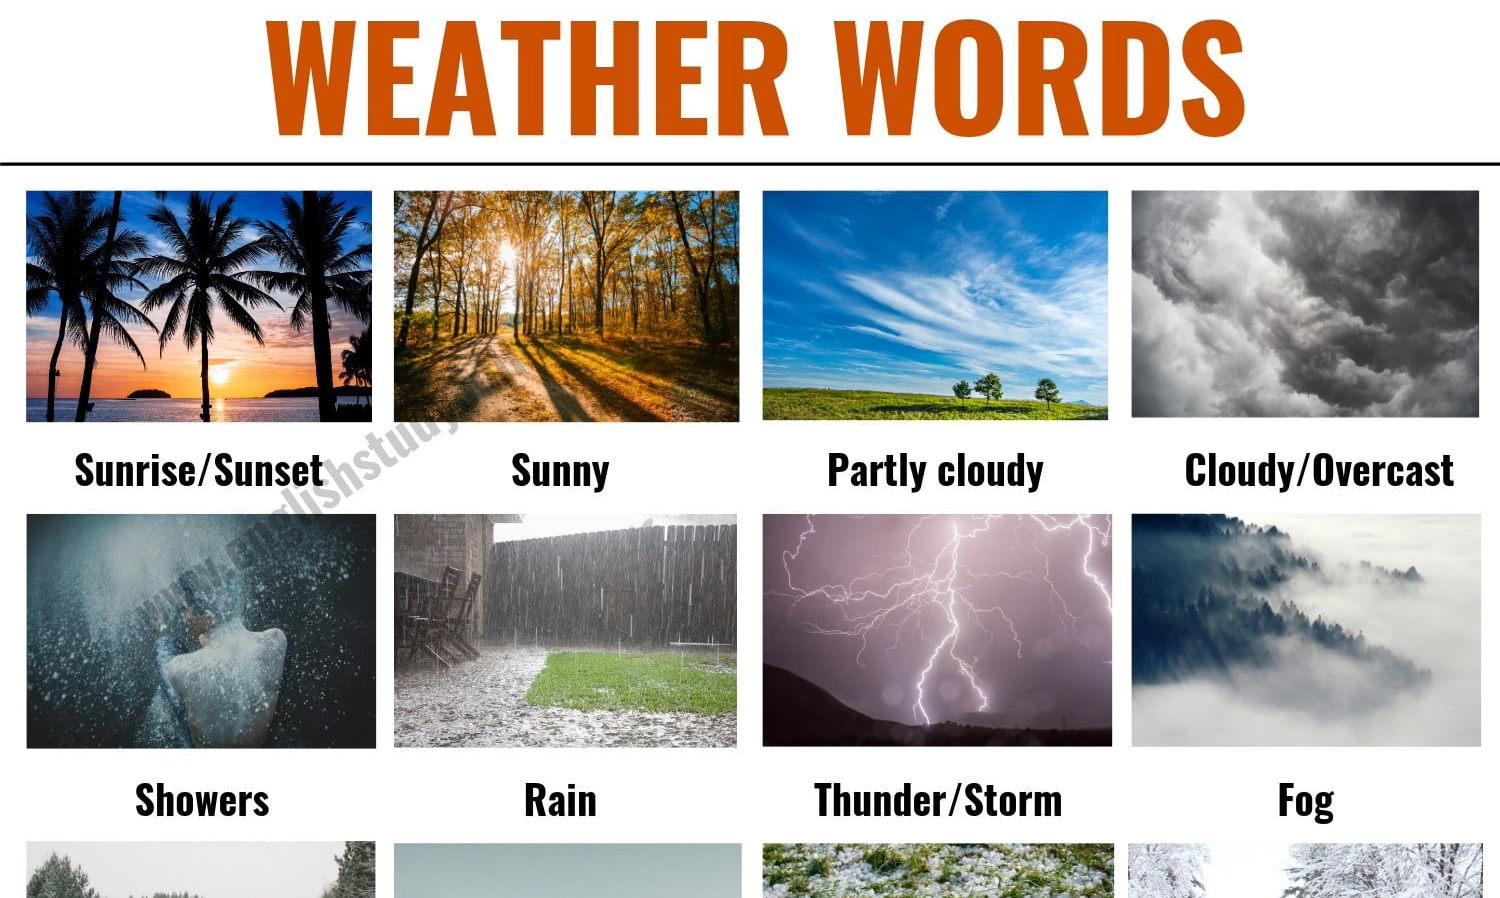 Weather слова. Погода на английском. Weather in English. Describing weather in English. The weather should